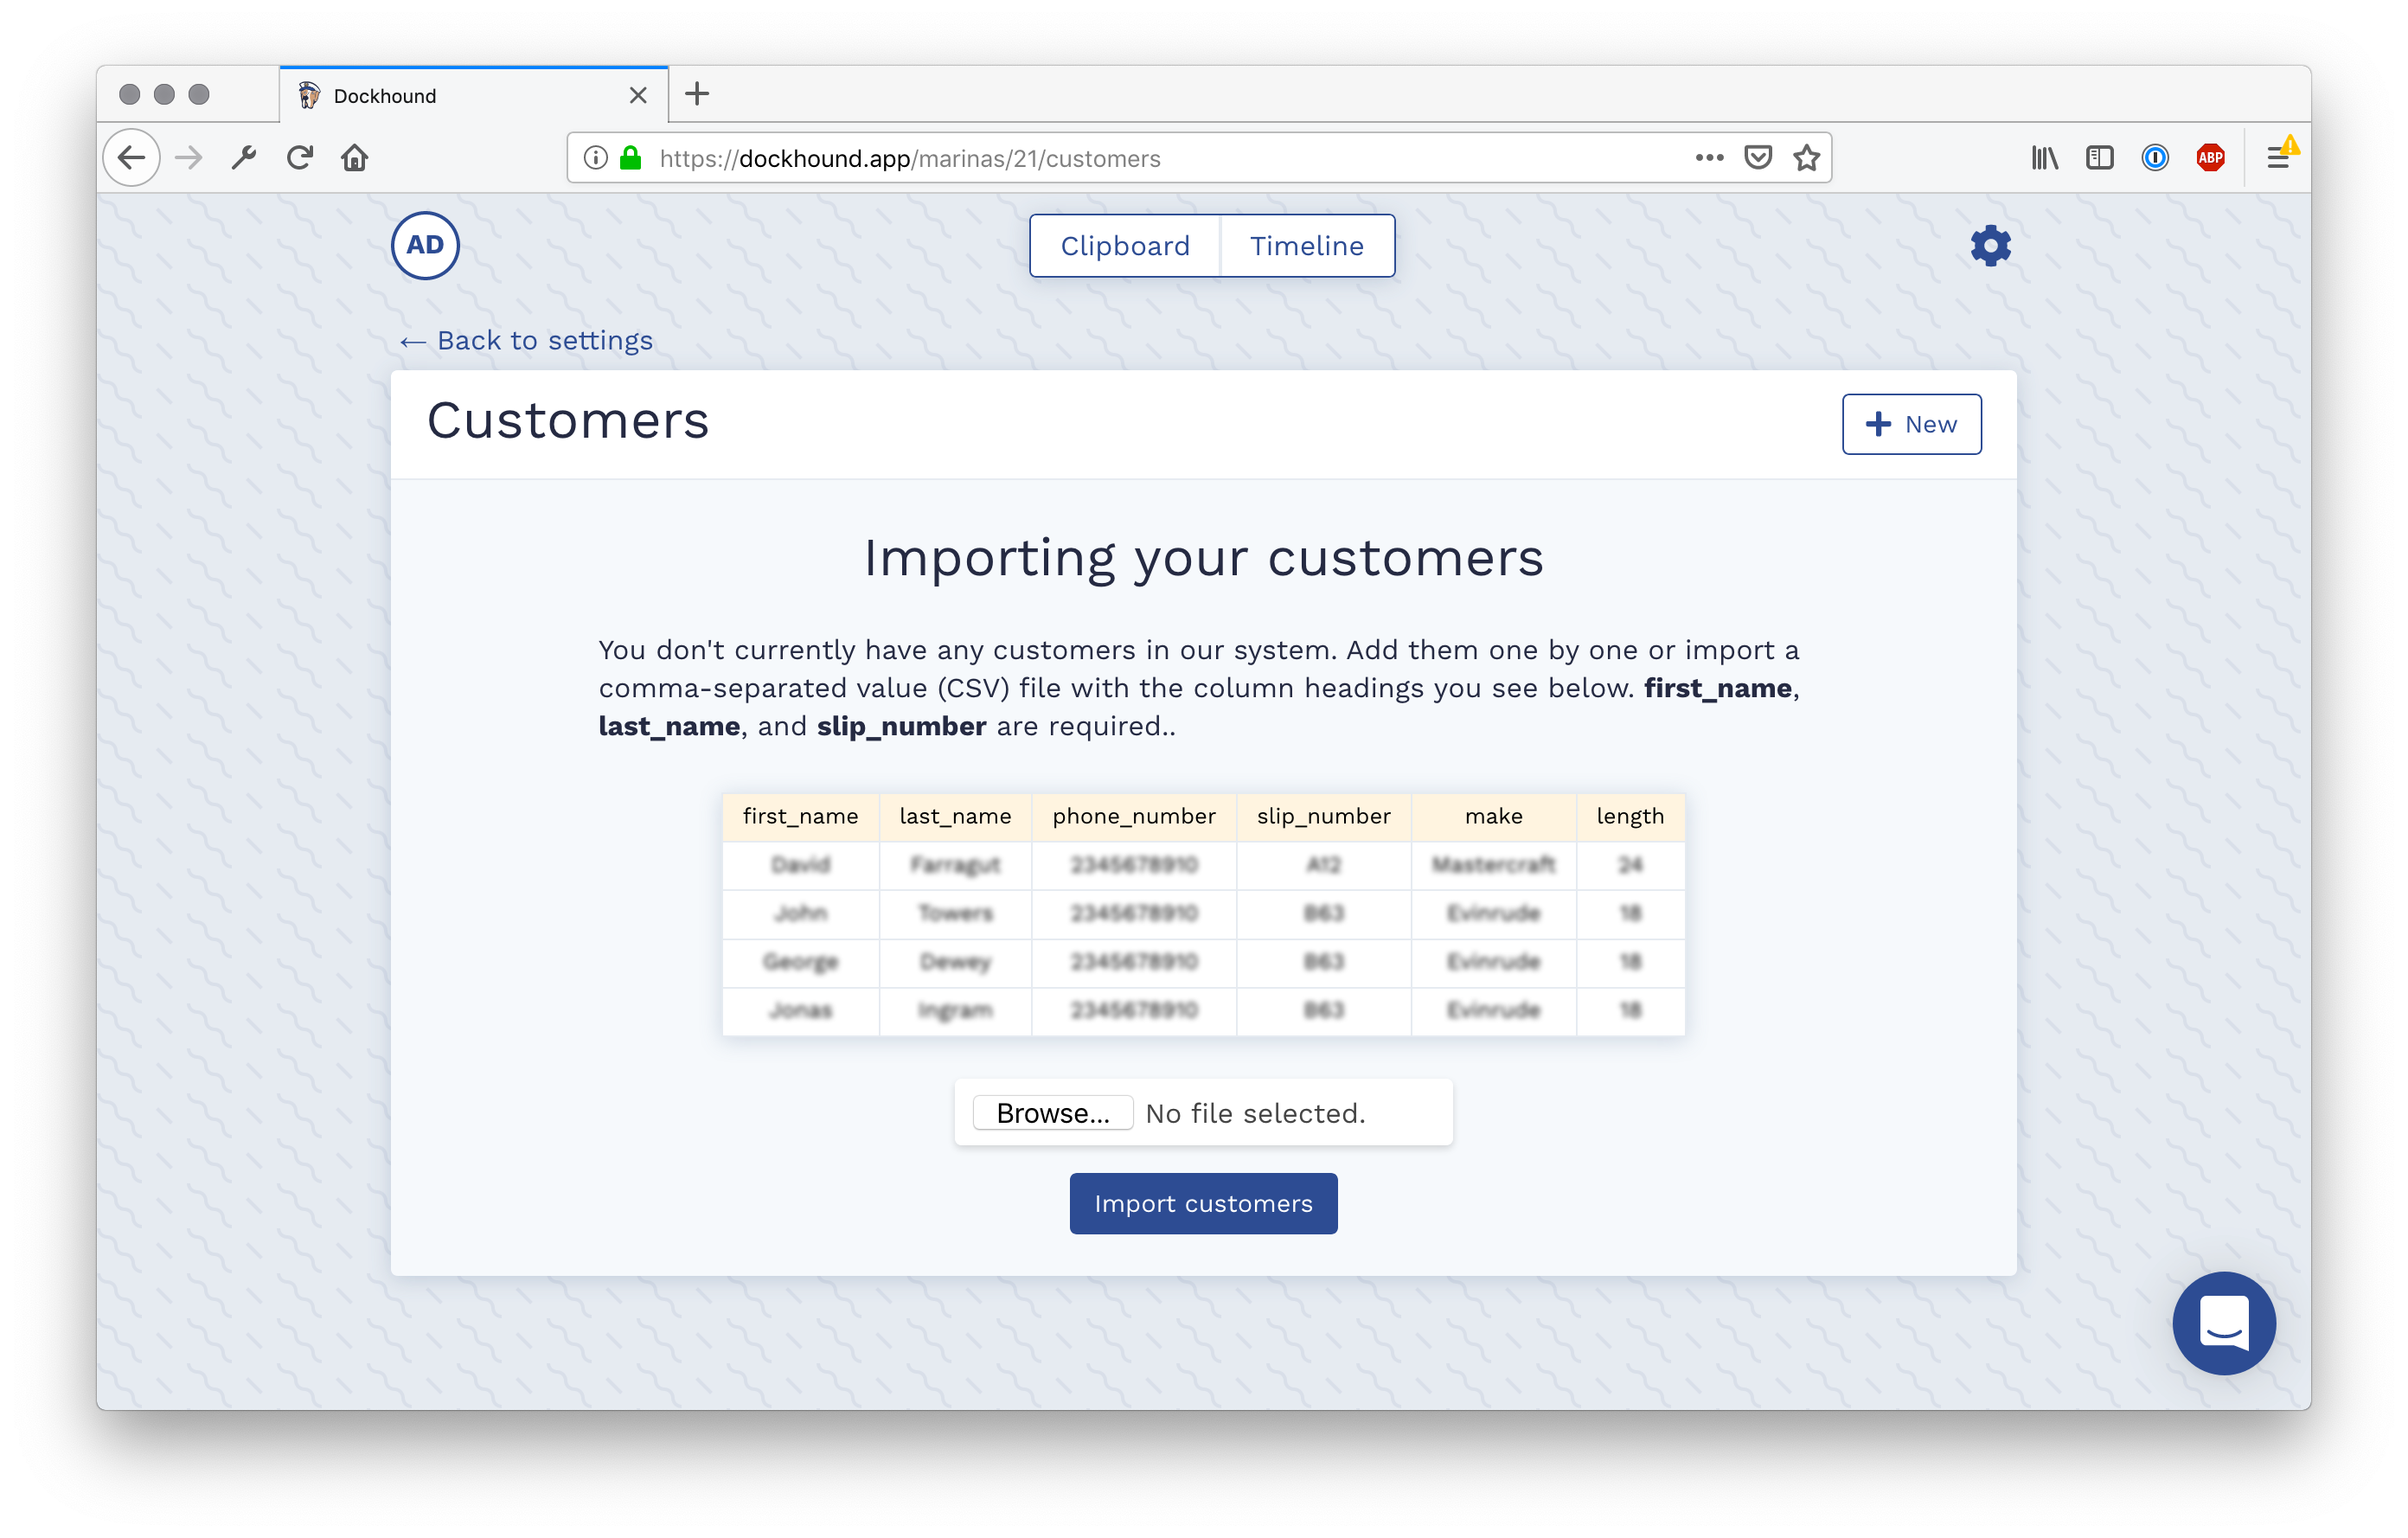 Importing customers in Dockhound